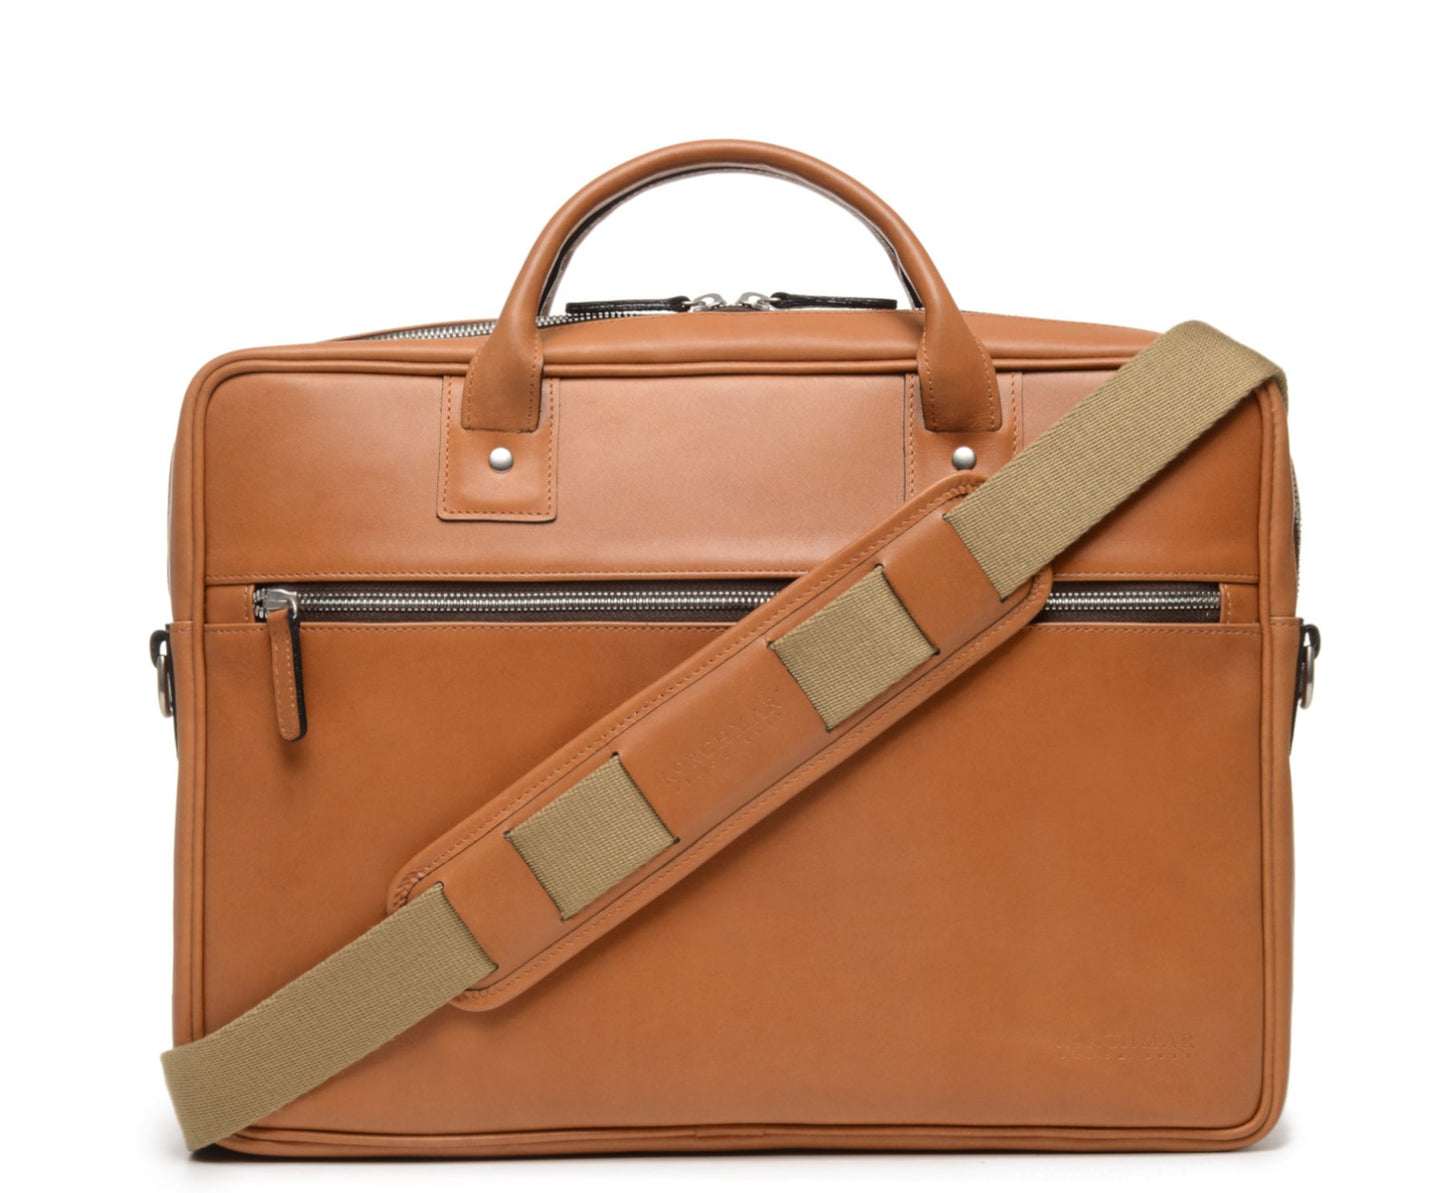 DYLAN Leather 15" Brief Bag | Grain Leather | Made in USA | Korchmar | London Tan Leather with Nickel Fittings